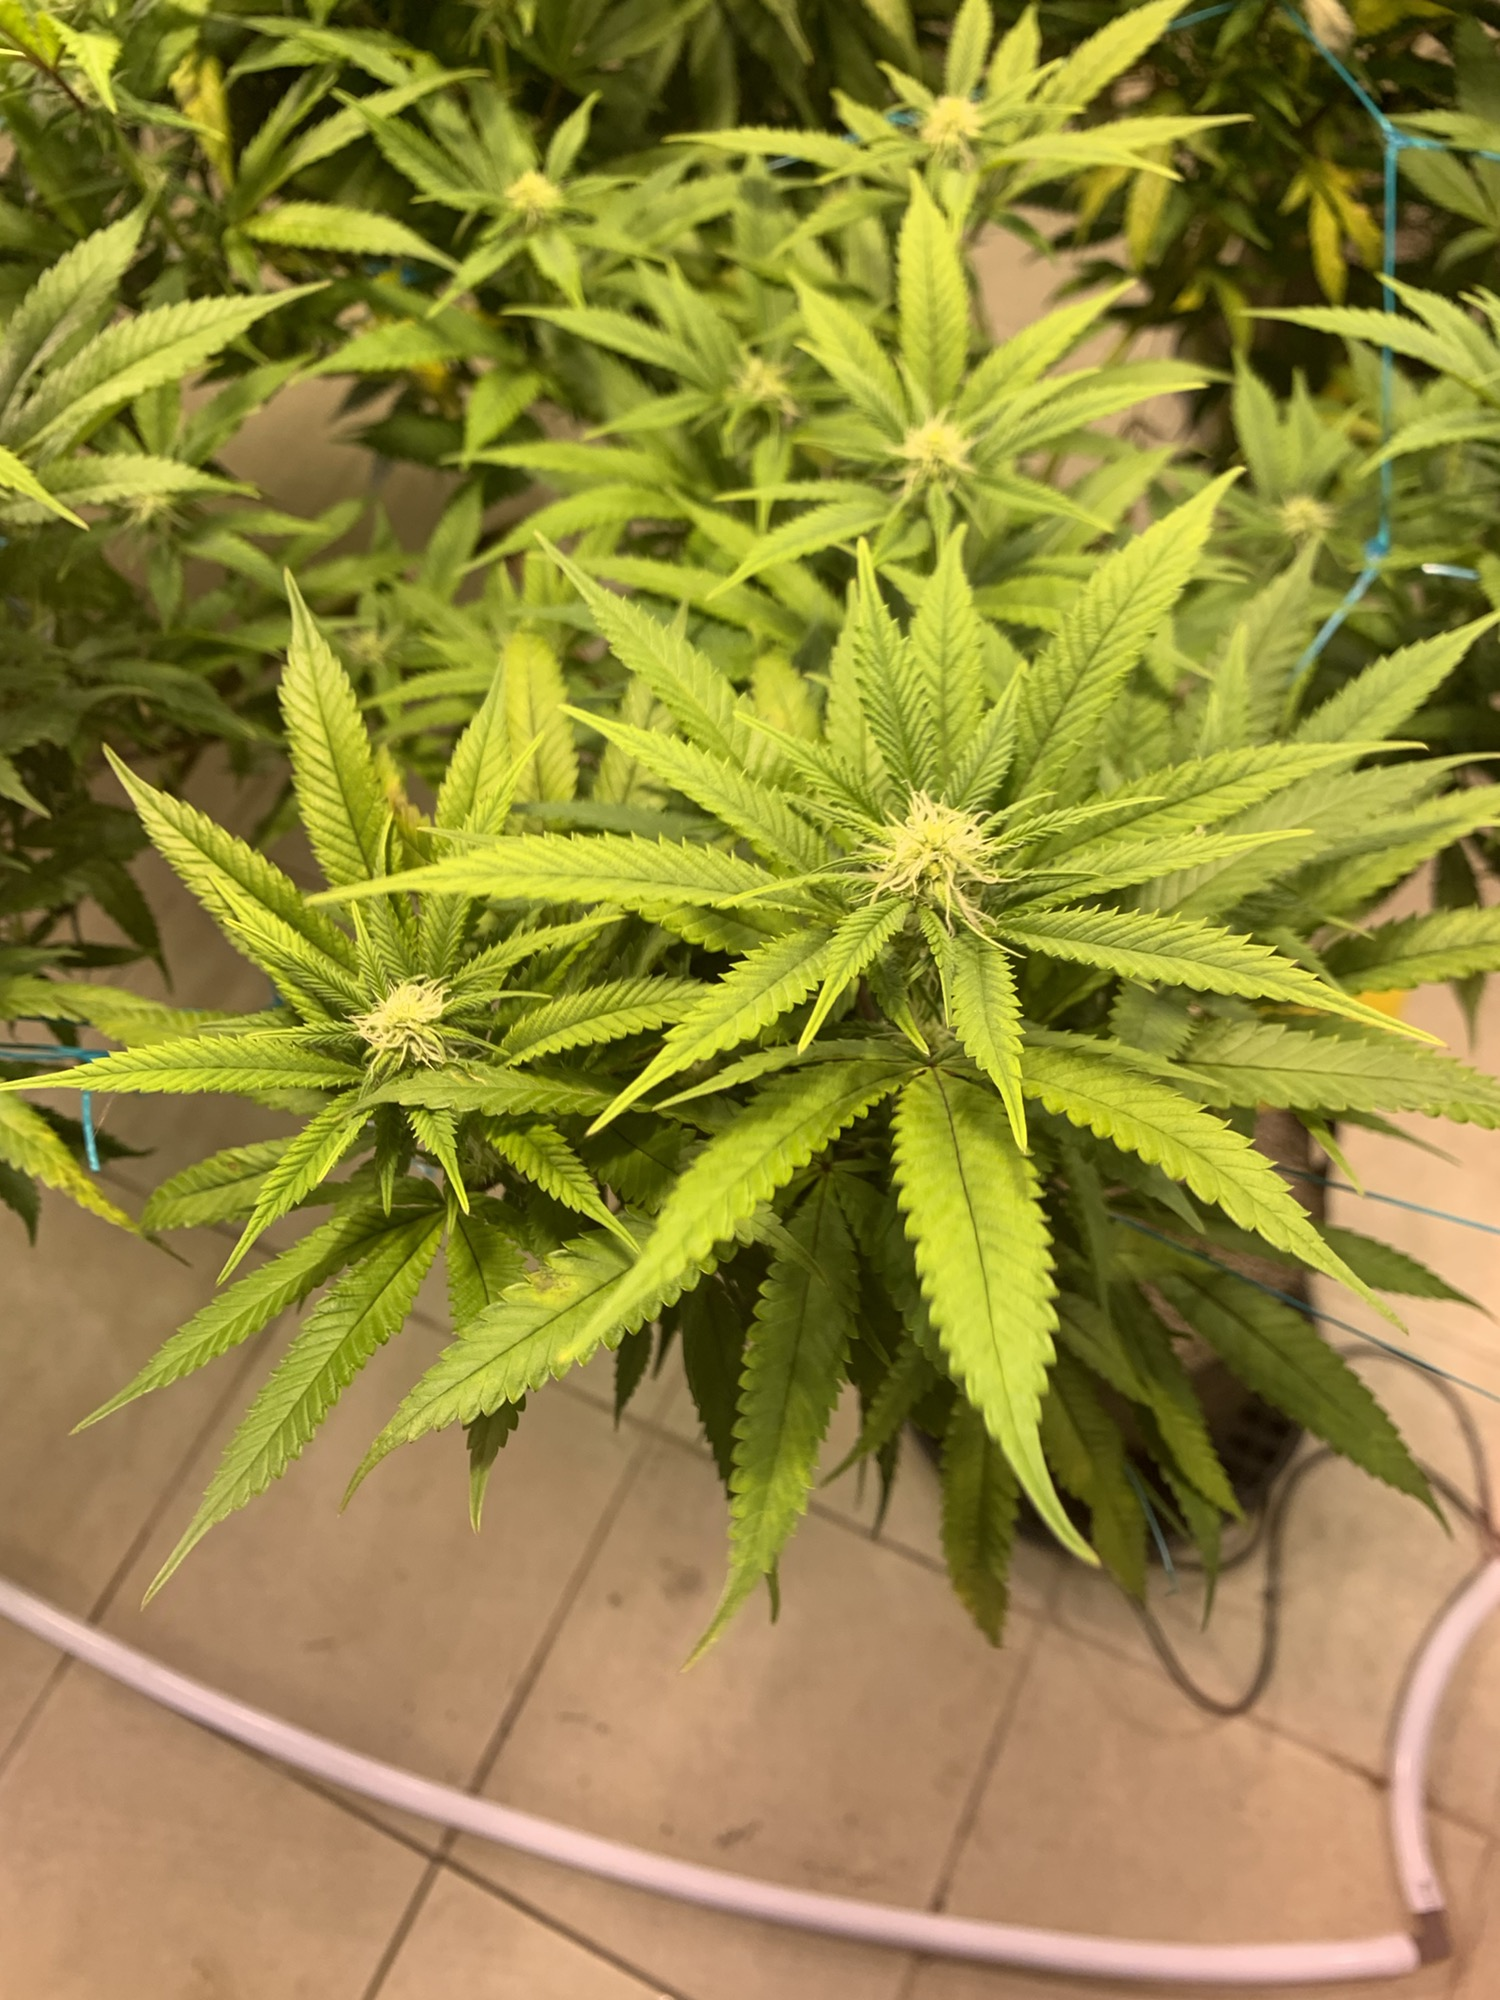 Light green leaves   not sure what deficiency this is